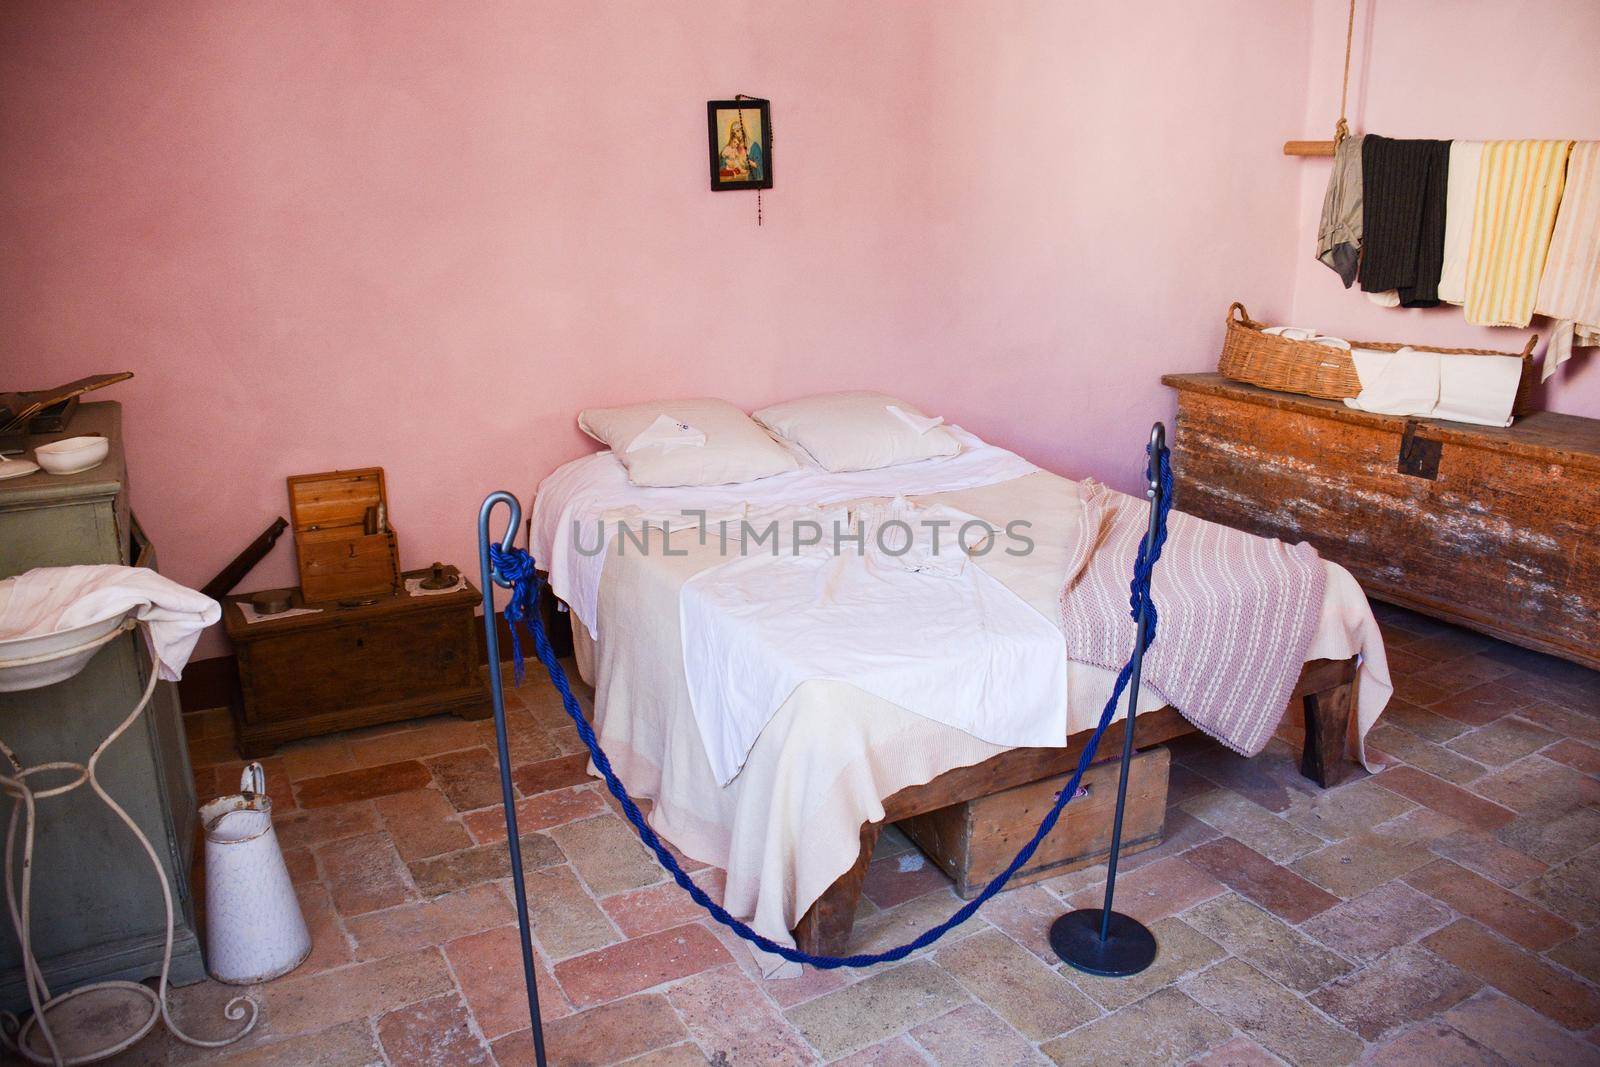 ancient bedroom from the 1800s of the master's coachman's family